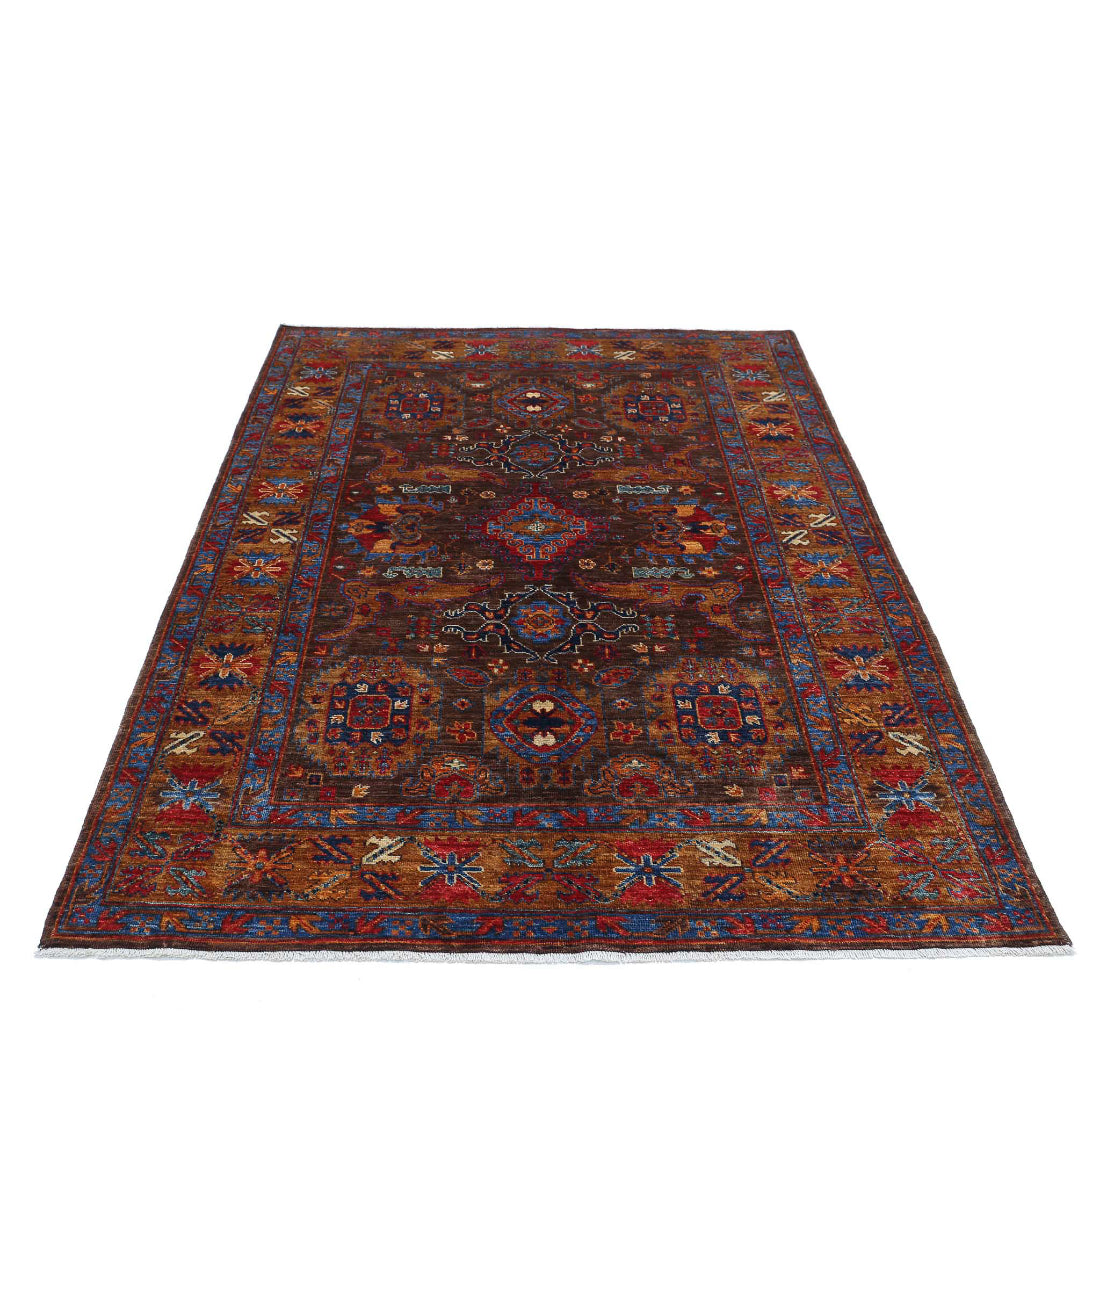 Hand Knotted Nomadic Caucasian Humna Wool Rug - 4'11'' x 6'9'' 4'11'' x 6'9'' (148 X 203) / Brown / Taupe